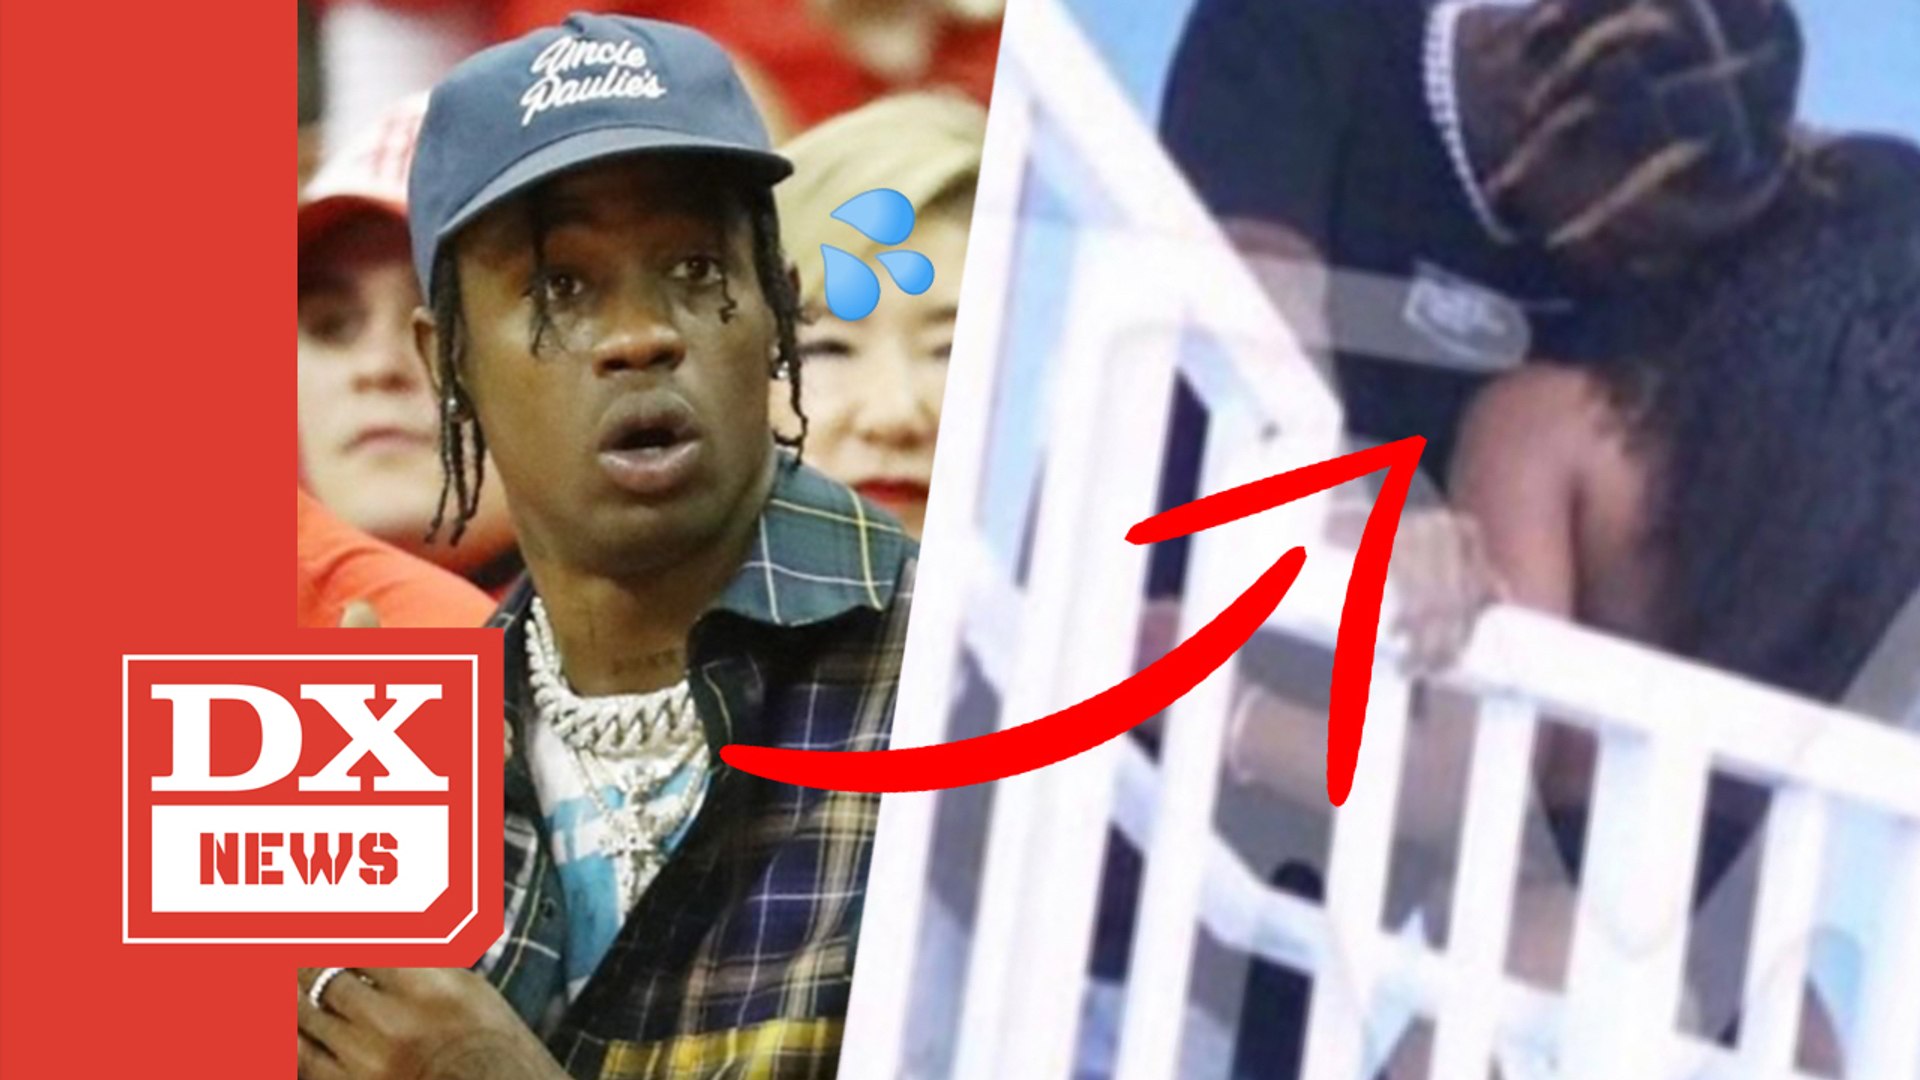 Travis Scott Denies Cheating On Kylie Jenner After Questionable Photo Surfaces